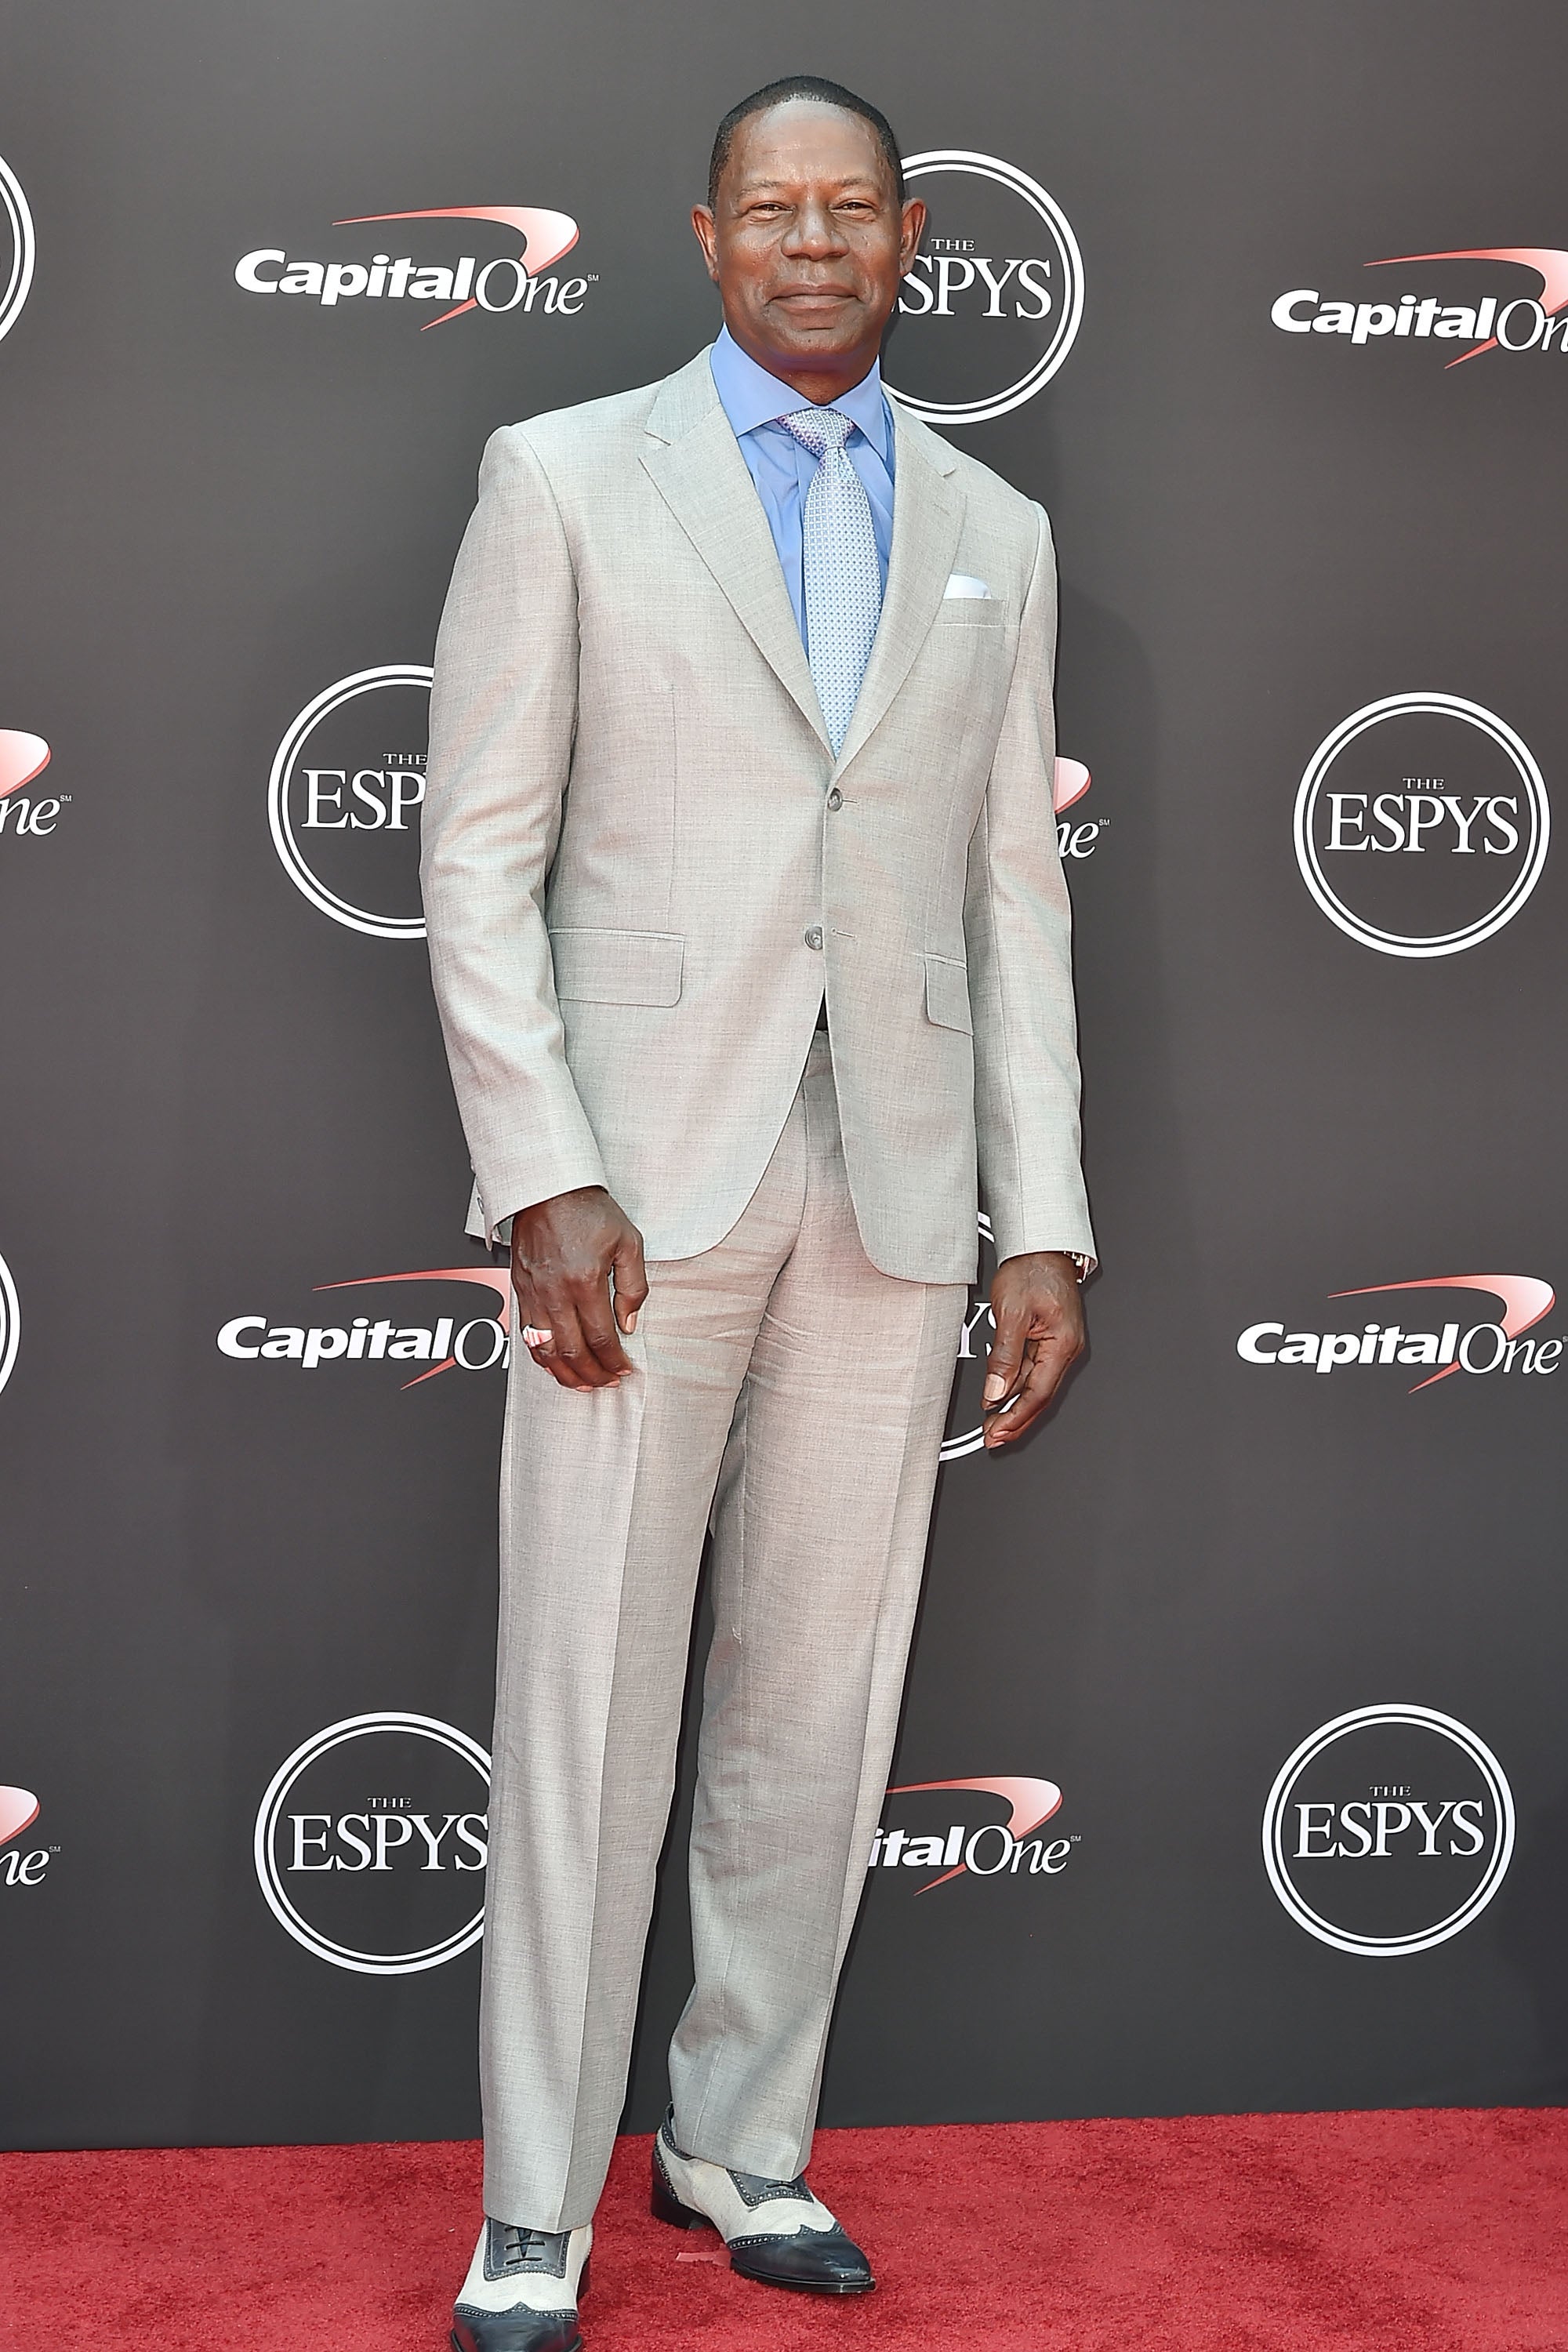 Razzle Dazzle! This Year's ESPY Awards Brought Out All The Style Stars
